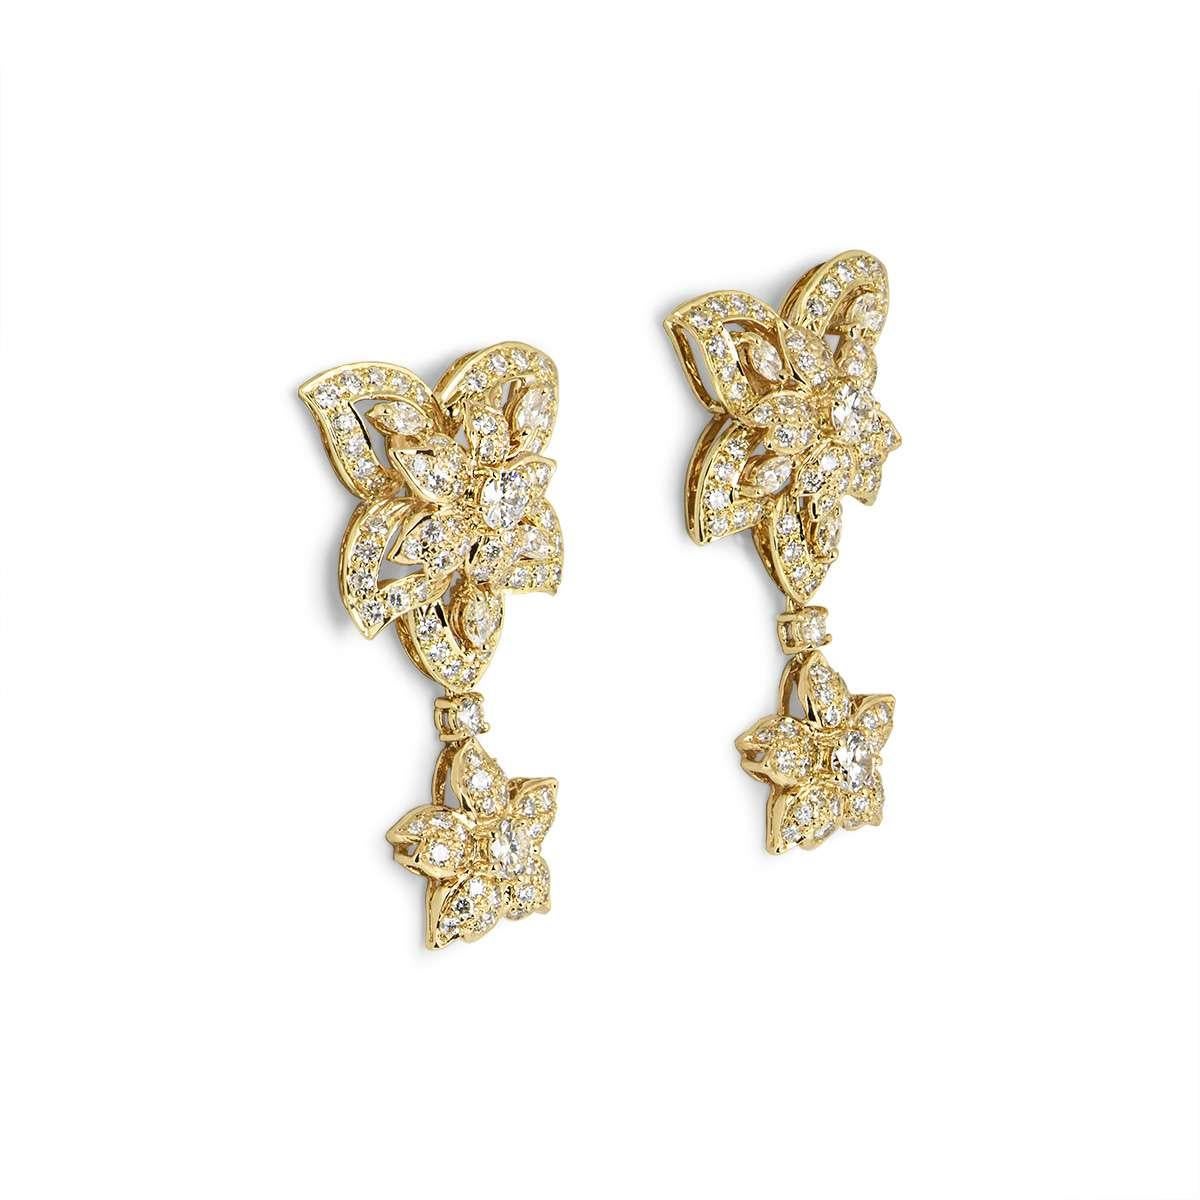 A pair of 18k yellow gold diamond set flower earrings. The earrings each feature a large openwork flower suspending a smaller flower motif. The earrings are set with round brilliant cut and marquise cut diamonds with a total weight of approximately